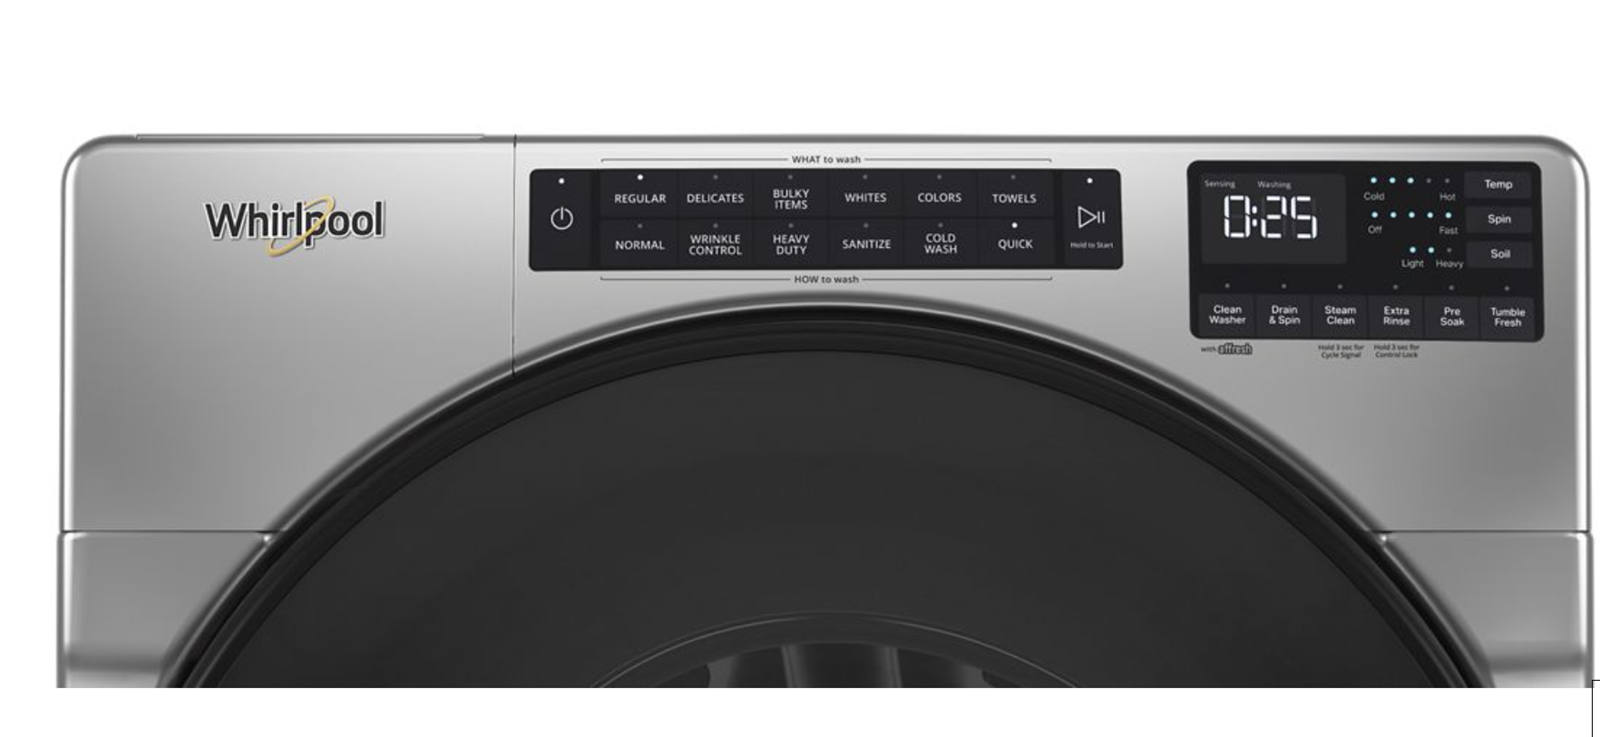 Whirlpool 4.5 cu. ft. Front Load Washer with Steam, Quick Wash Cycle and Vibration Control Technology in Chrome Shadow 3